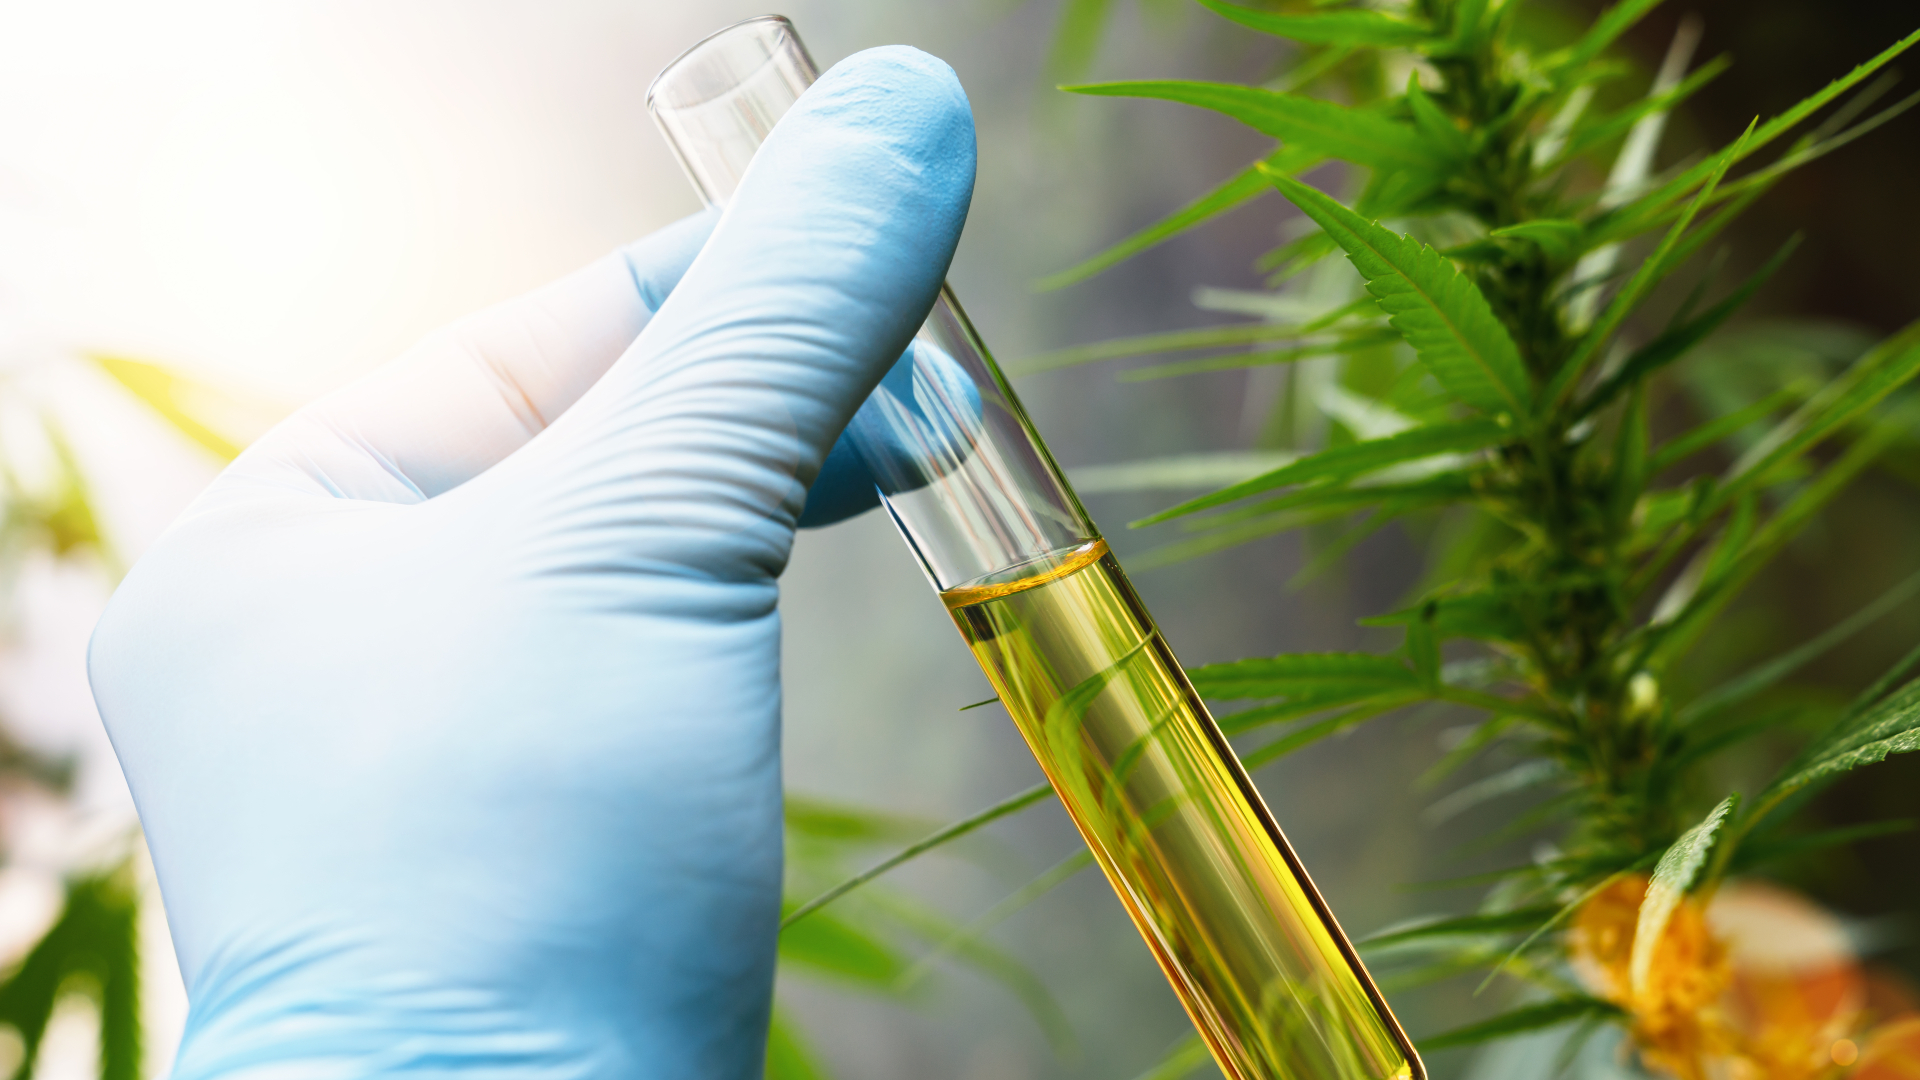 Cannabis Testing: What Are Regulators Checking For?